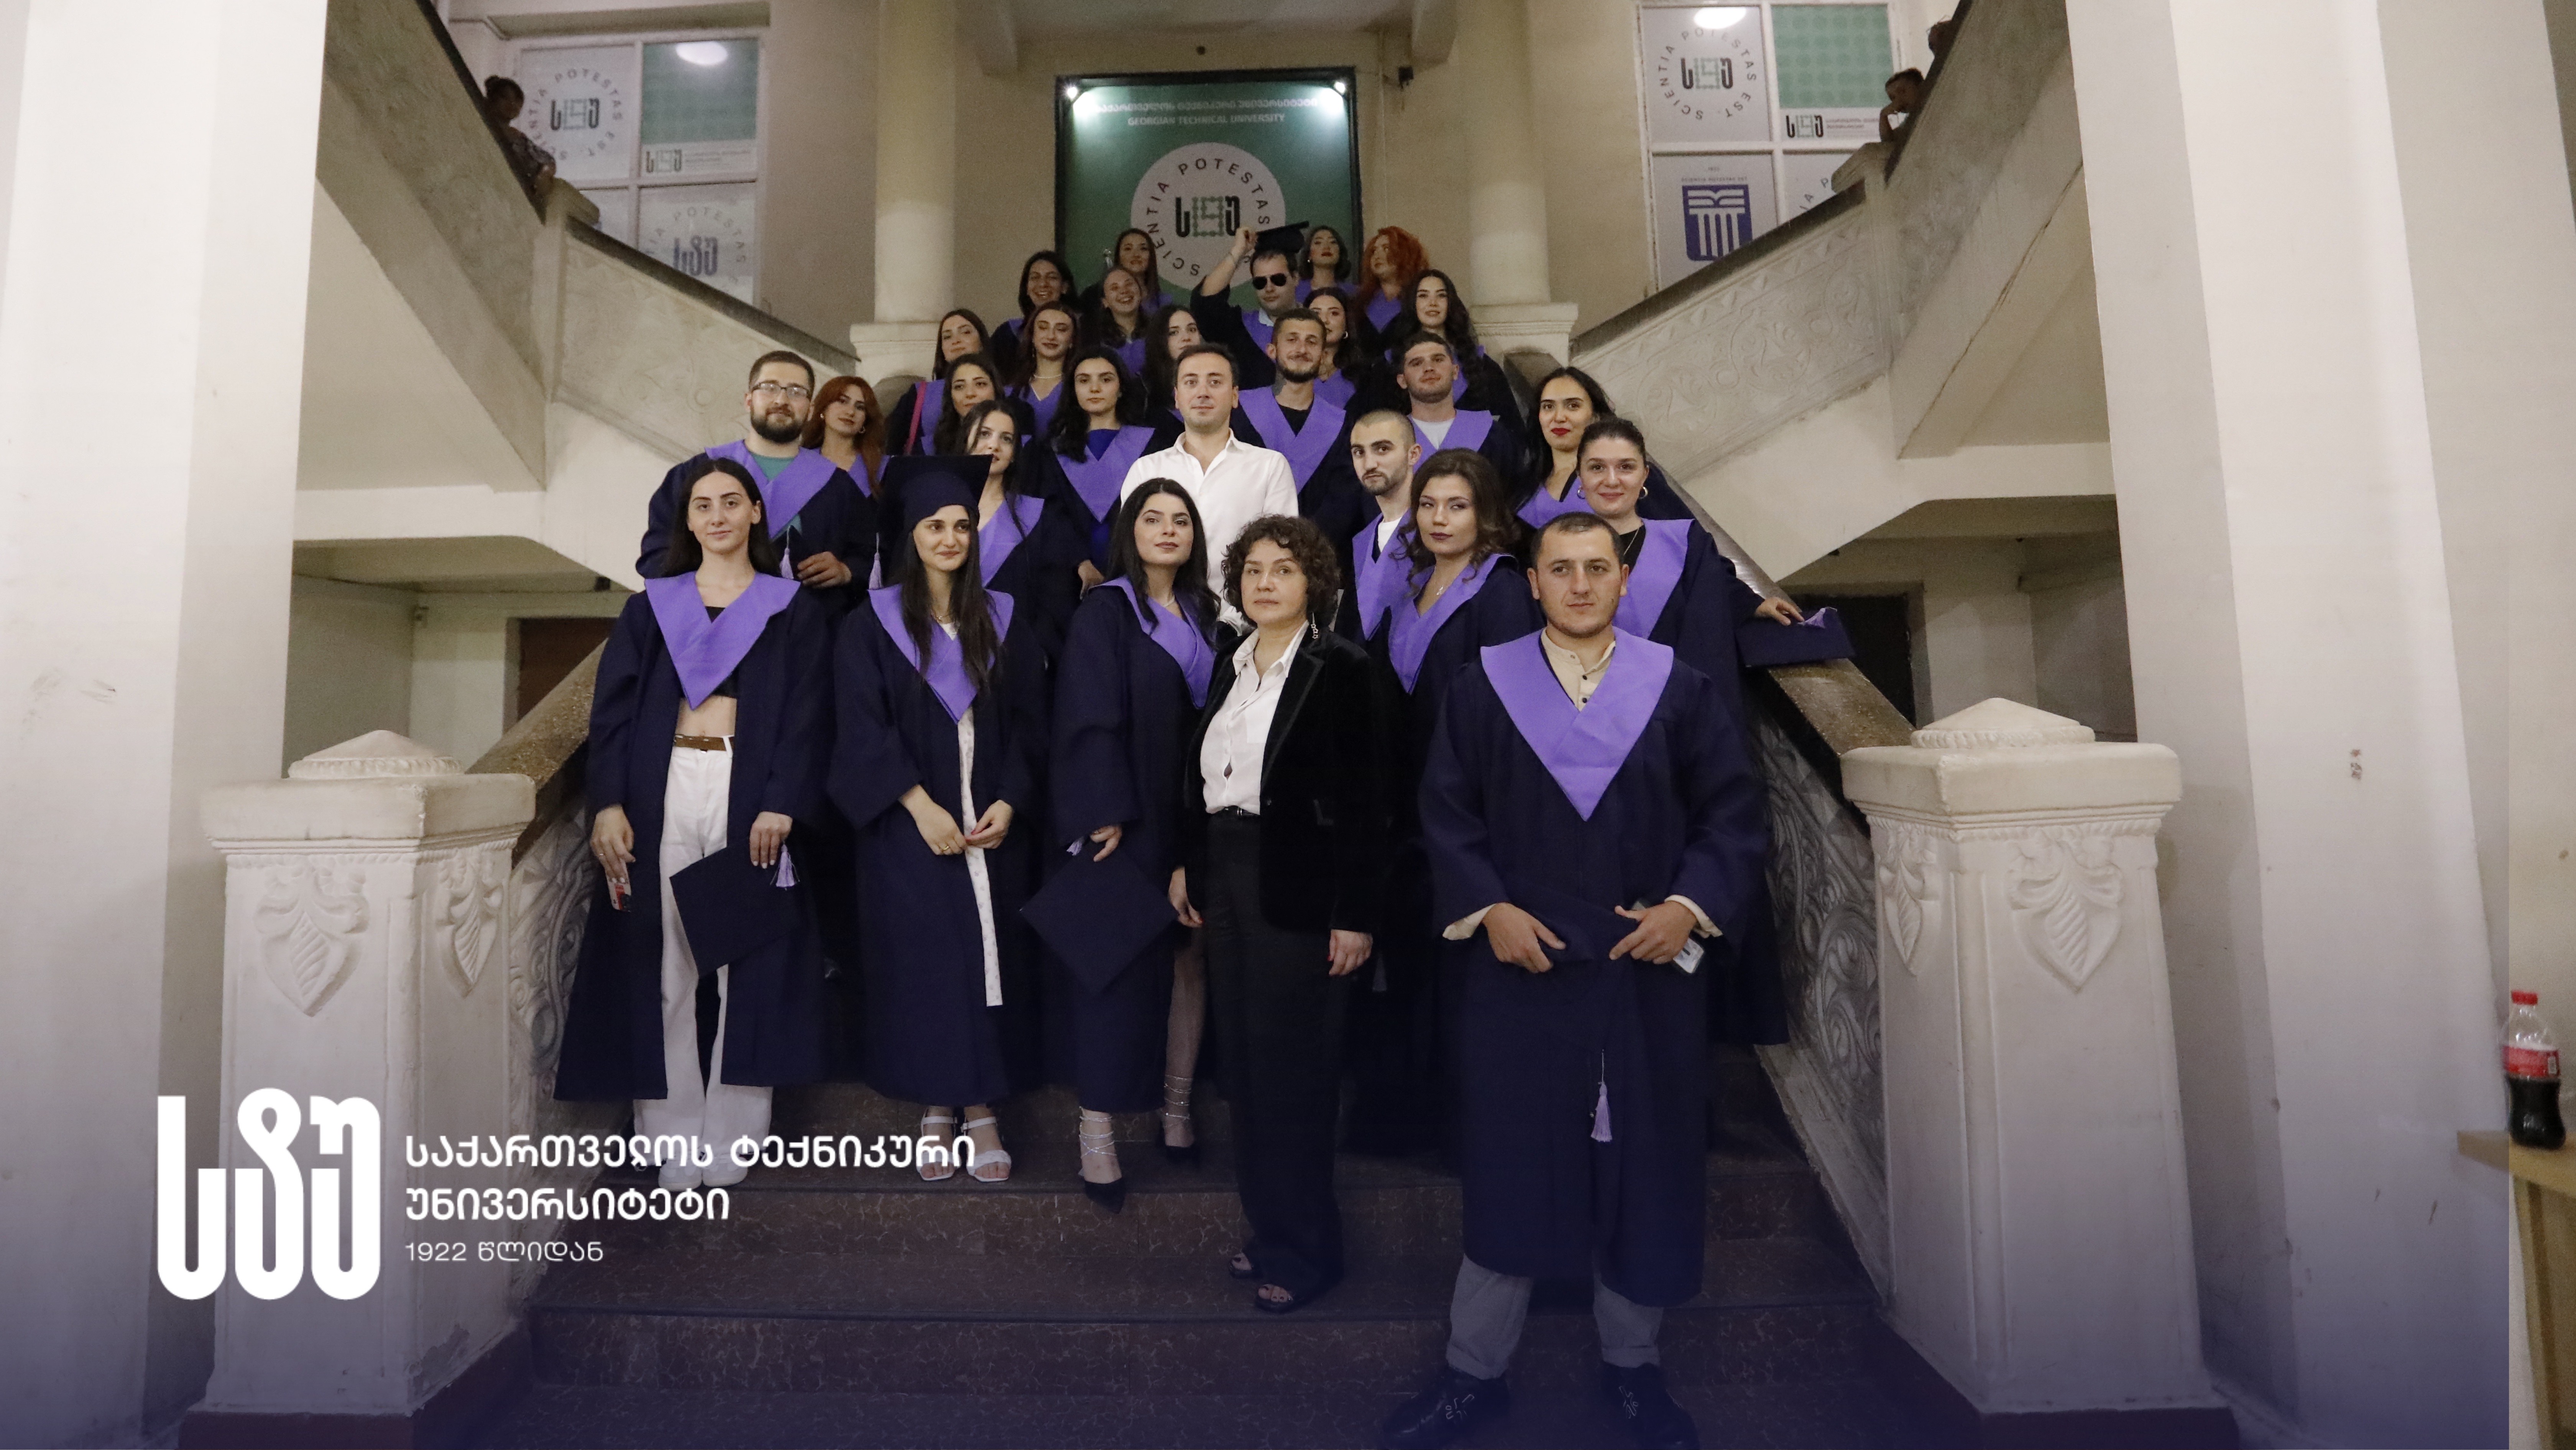 A graduation ceremony was held at the Faculty of Chemical Technology and Metallurgy